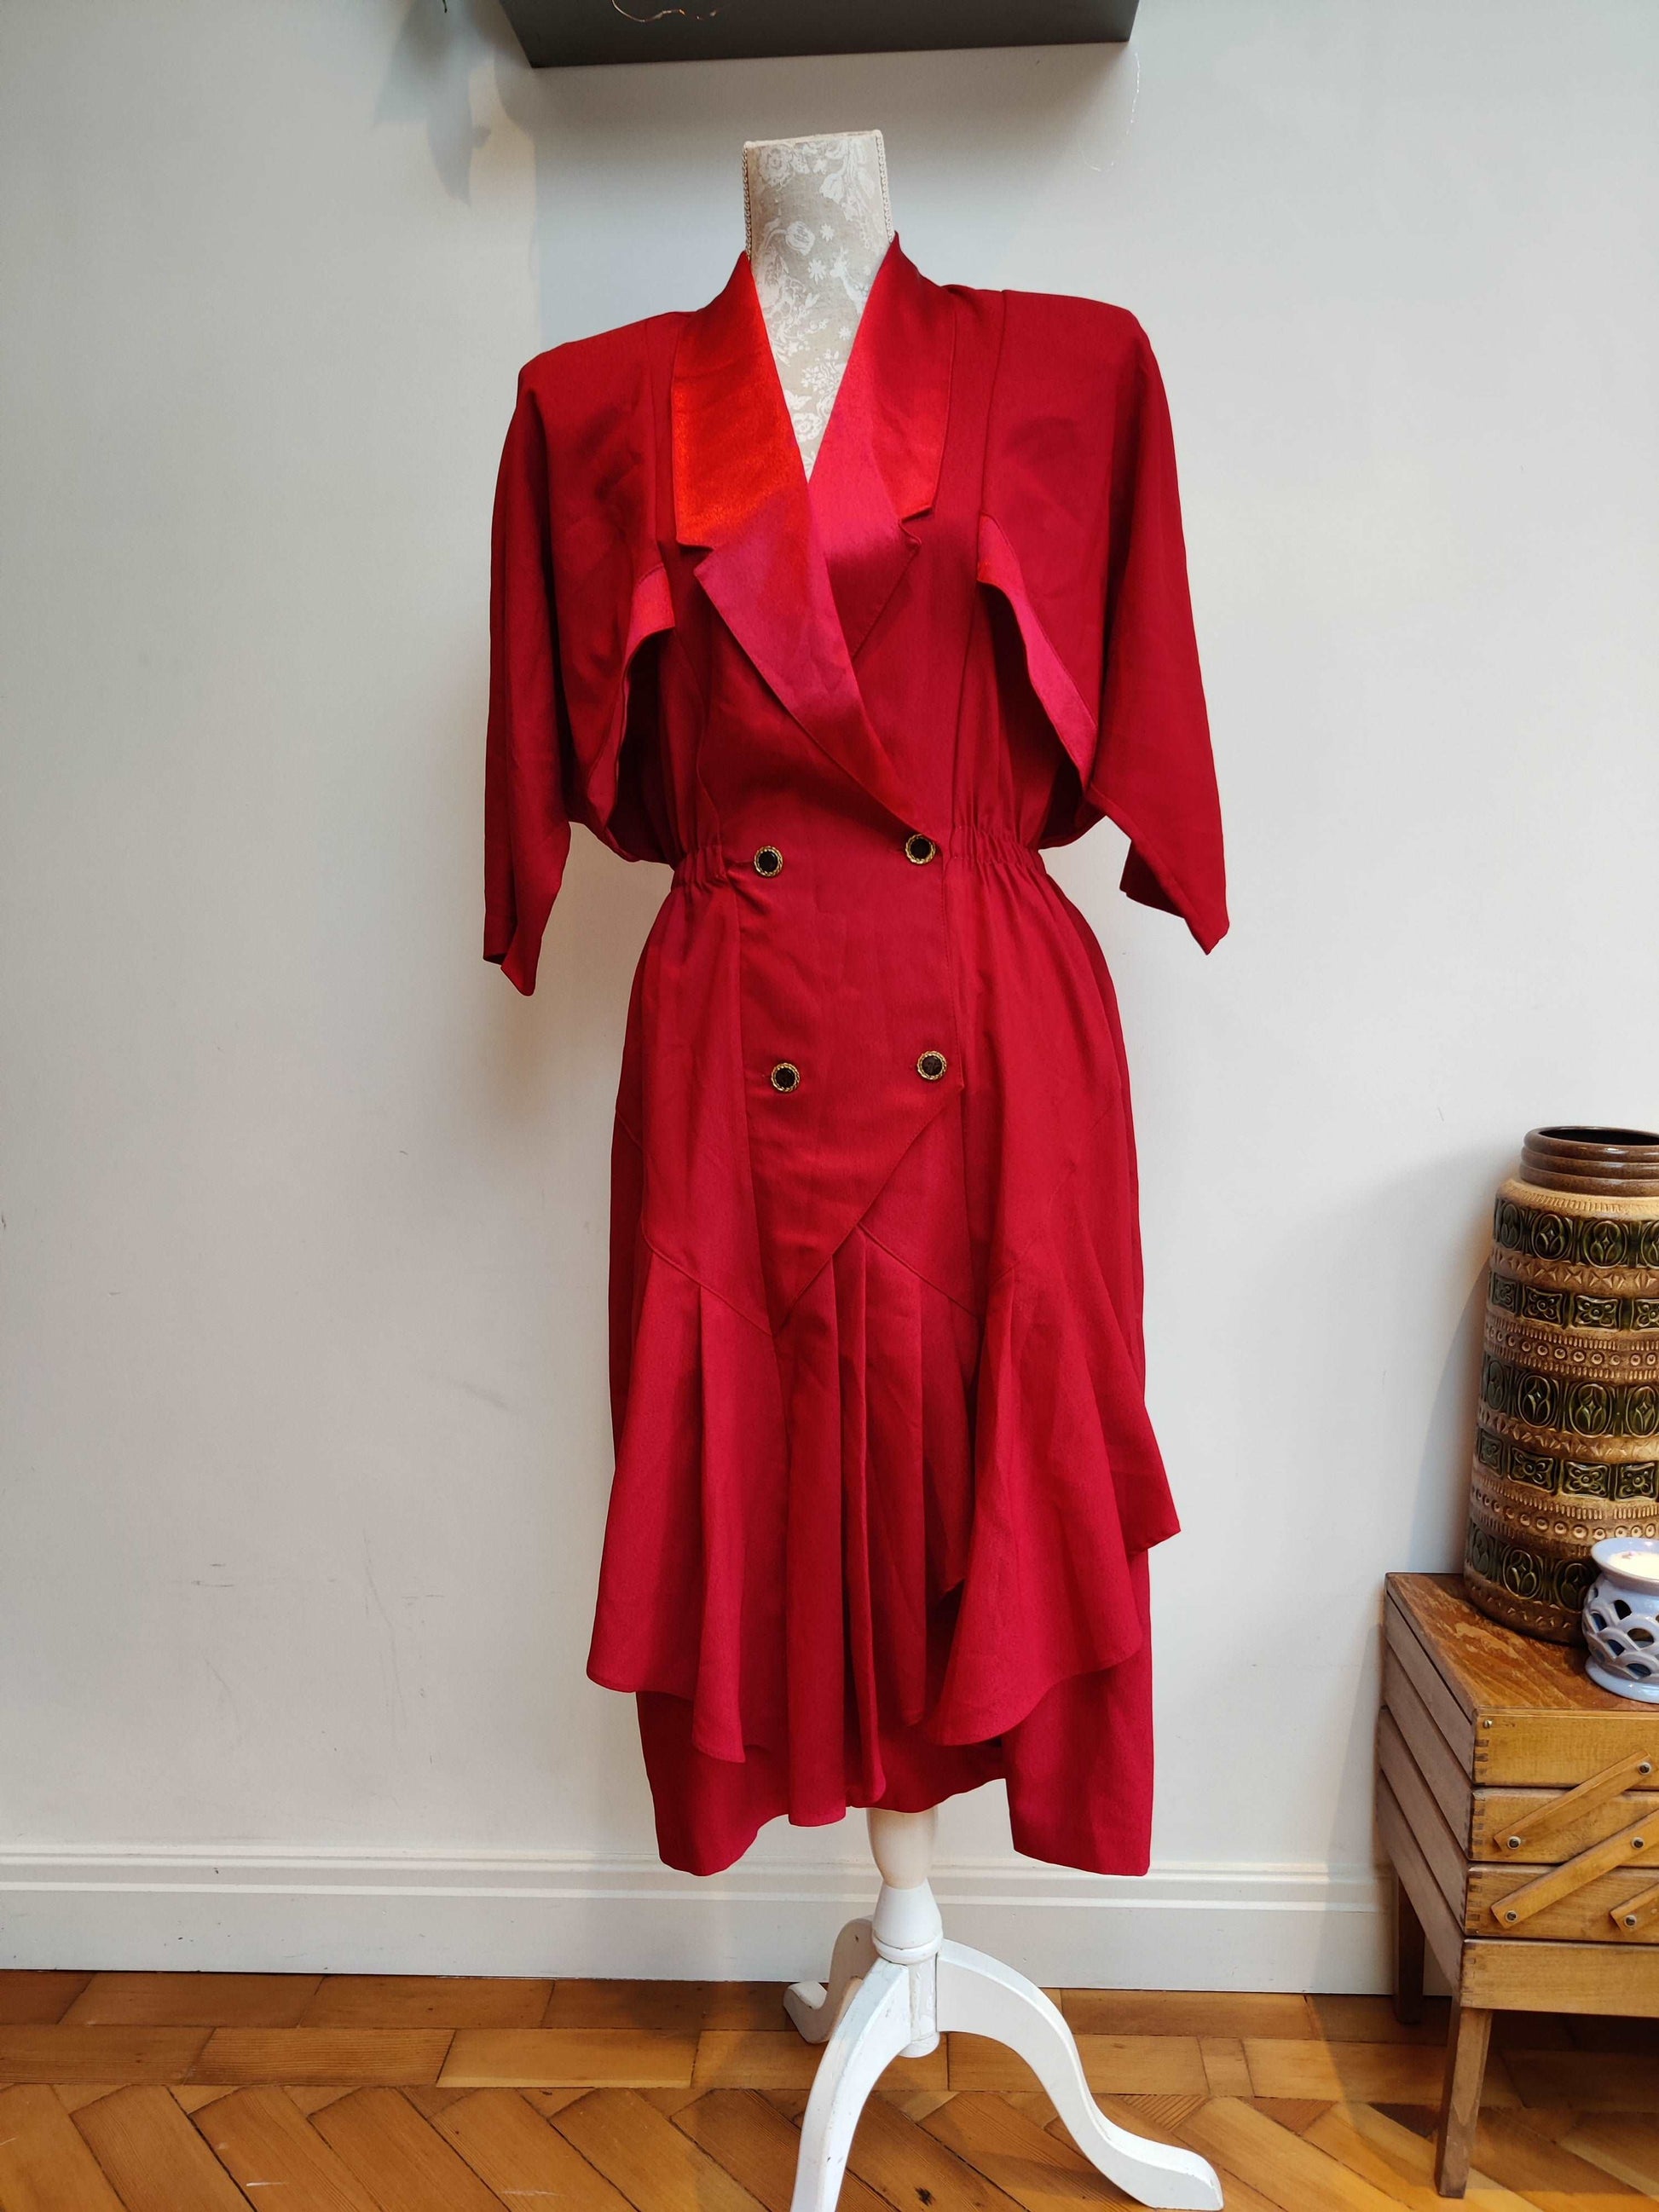 Incredible red vintage dress with tuxedo  style bib